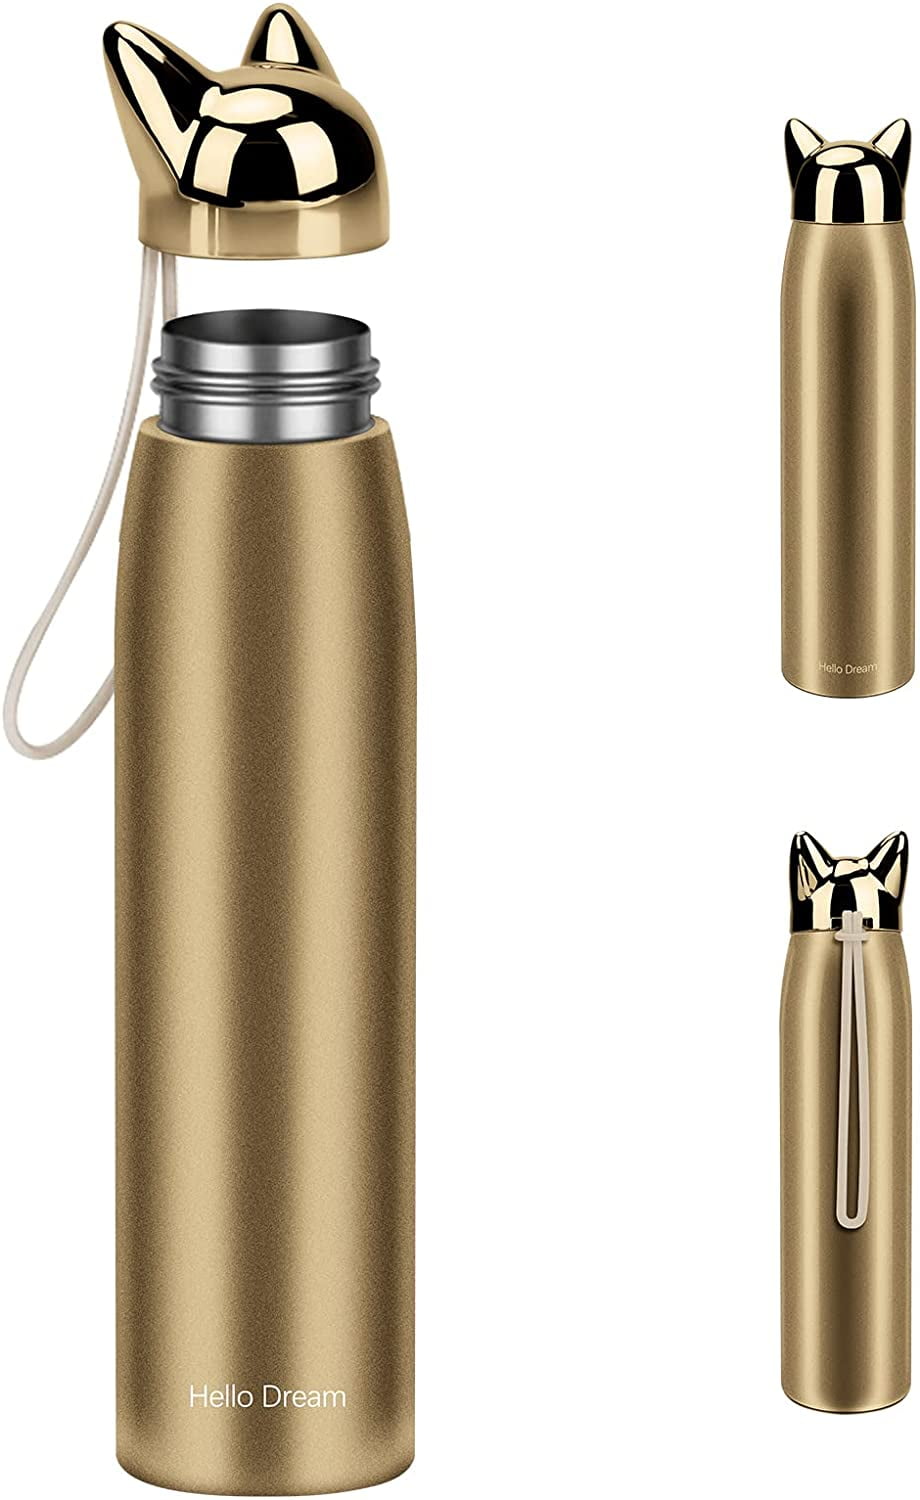 Cute Fox Leave Kids Water Bottle Thermos with Straw School Vacuum Insulated Stainless Steel Thermos Bottle Cup Leakproof Sport Travel Cup Mug Handle for Girls Women Biking 20 OZ